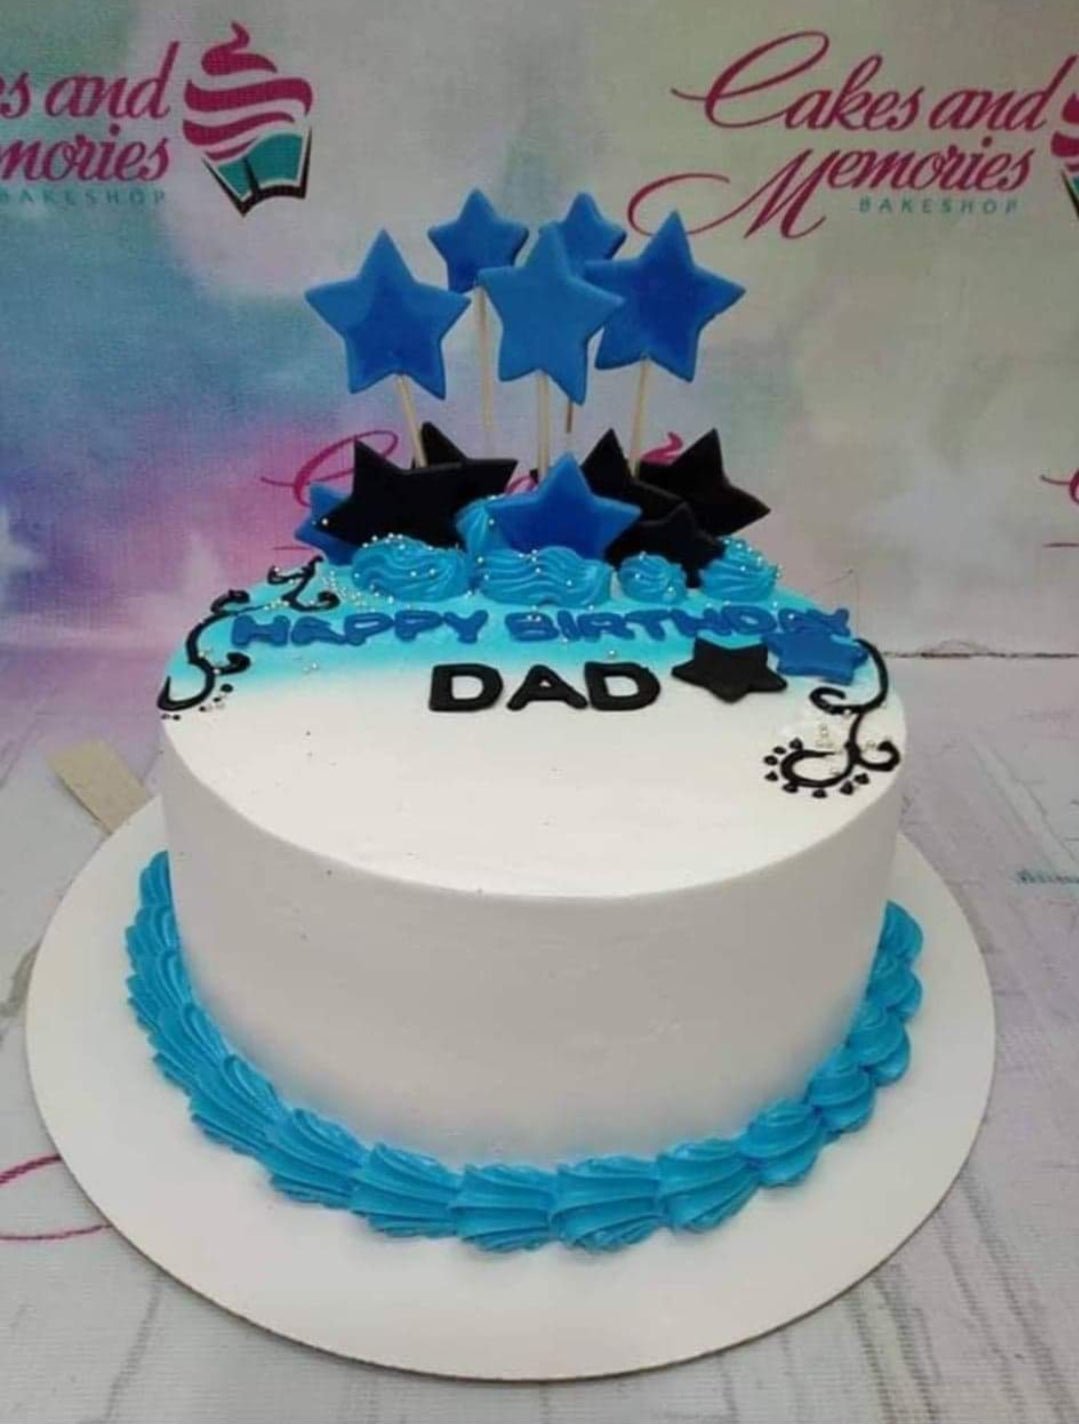 Buy Chocolate Bliss for Dad-Chocolate Bliss for Dad